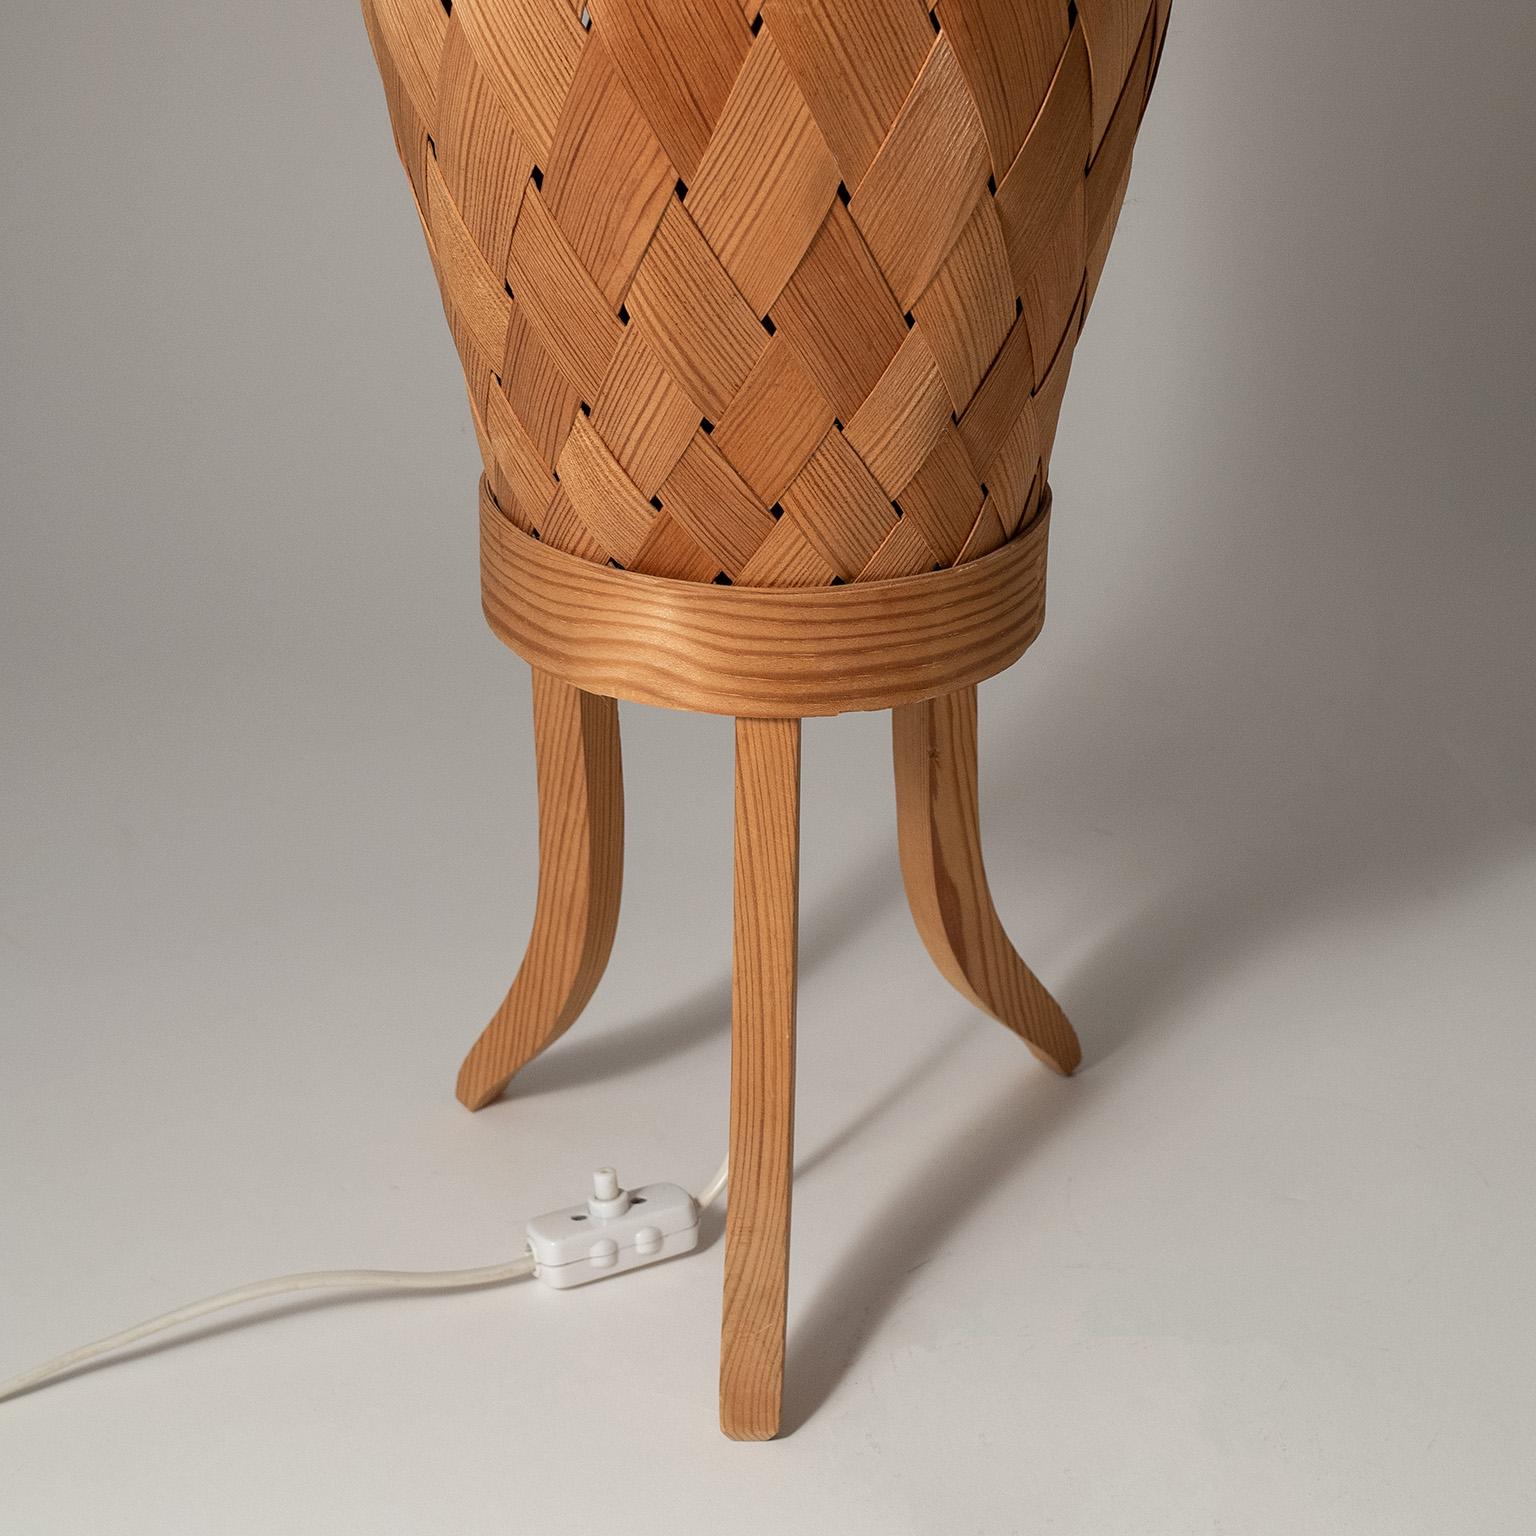 Tall Swedish Pinewood Table Lamp, 1960s For Sale 2